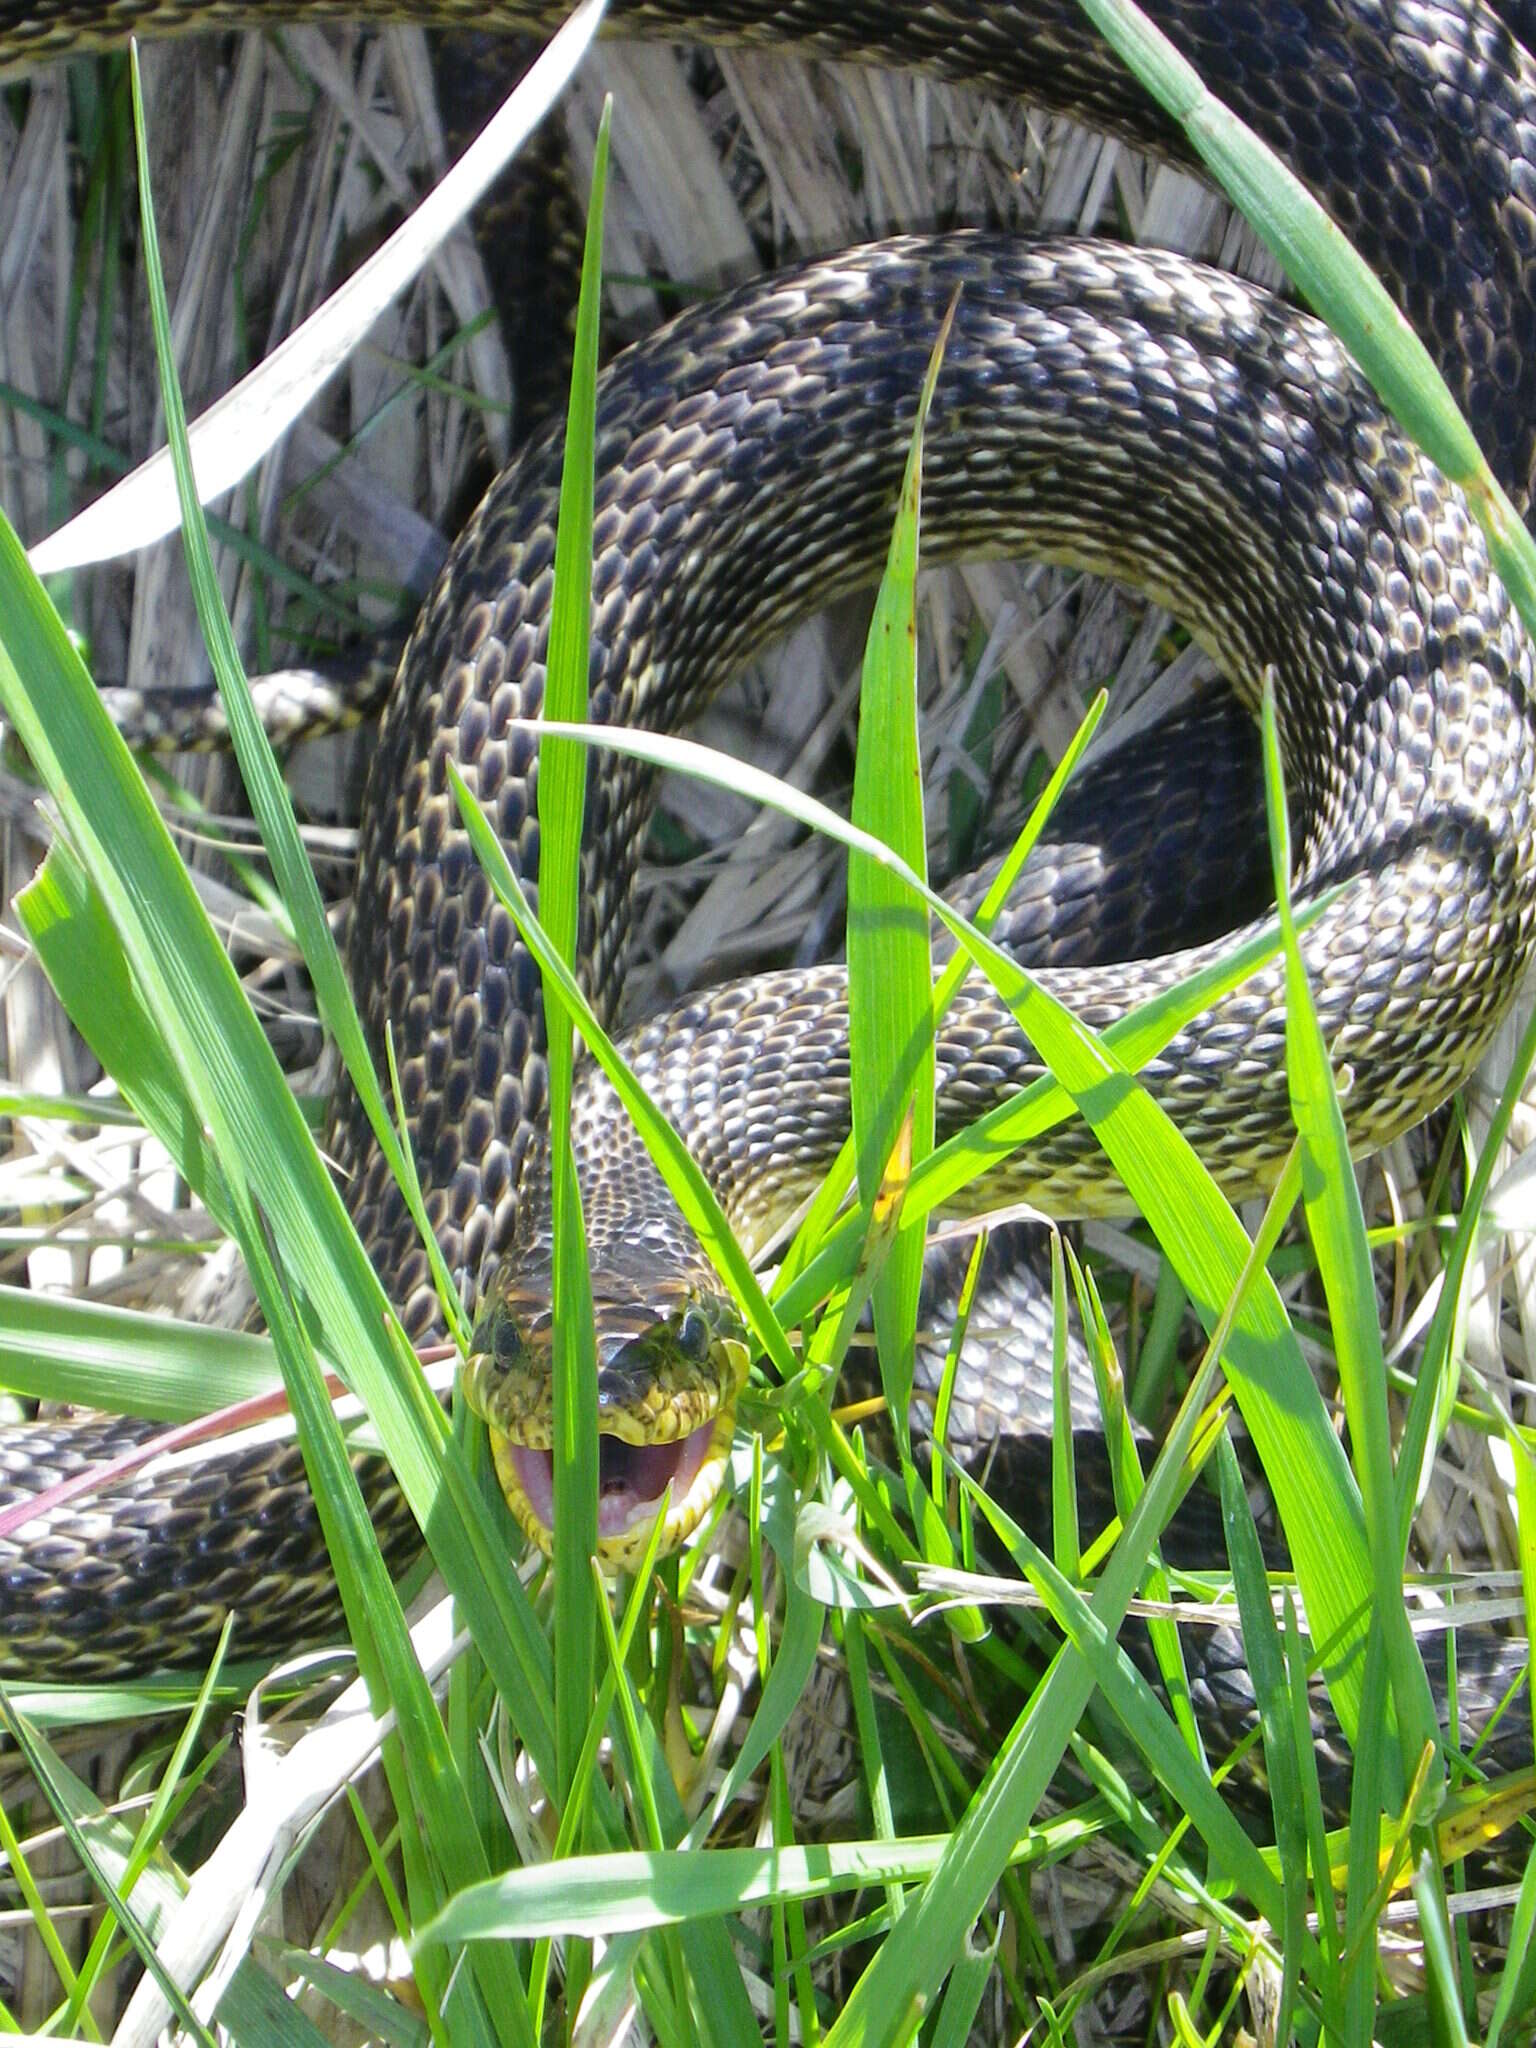 Image of East-Four-lined Ratsnake